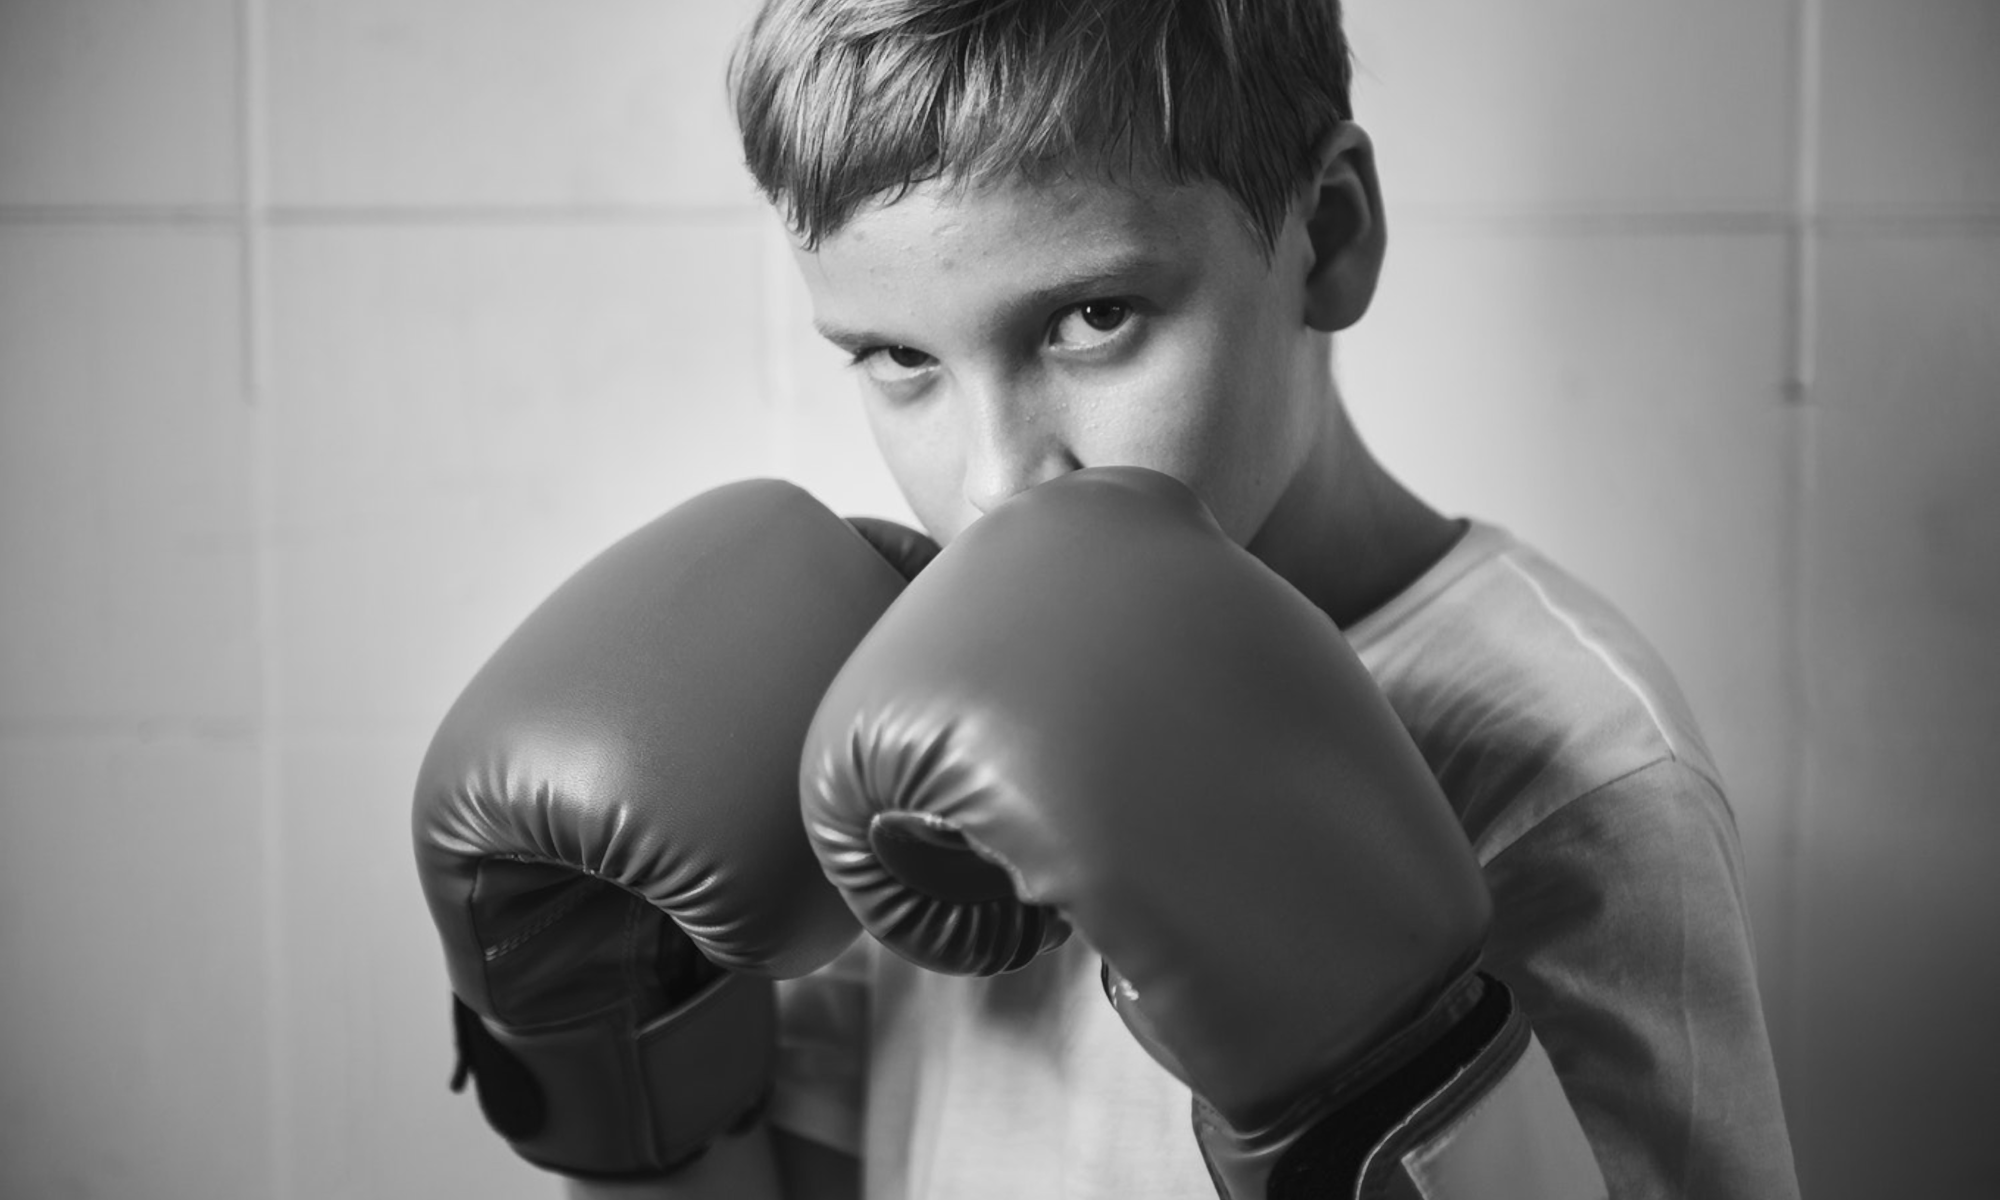 Boxing youth